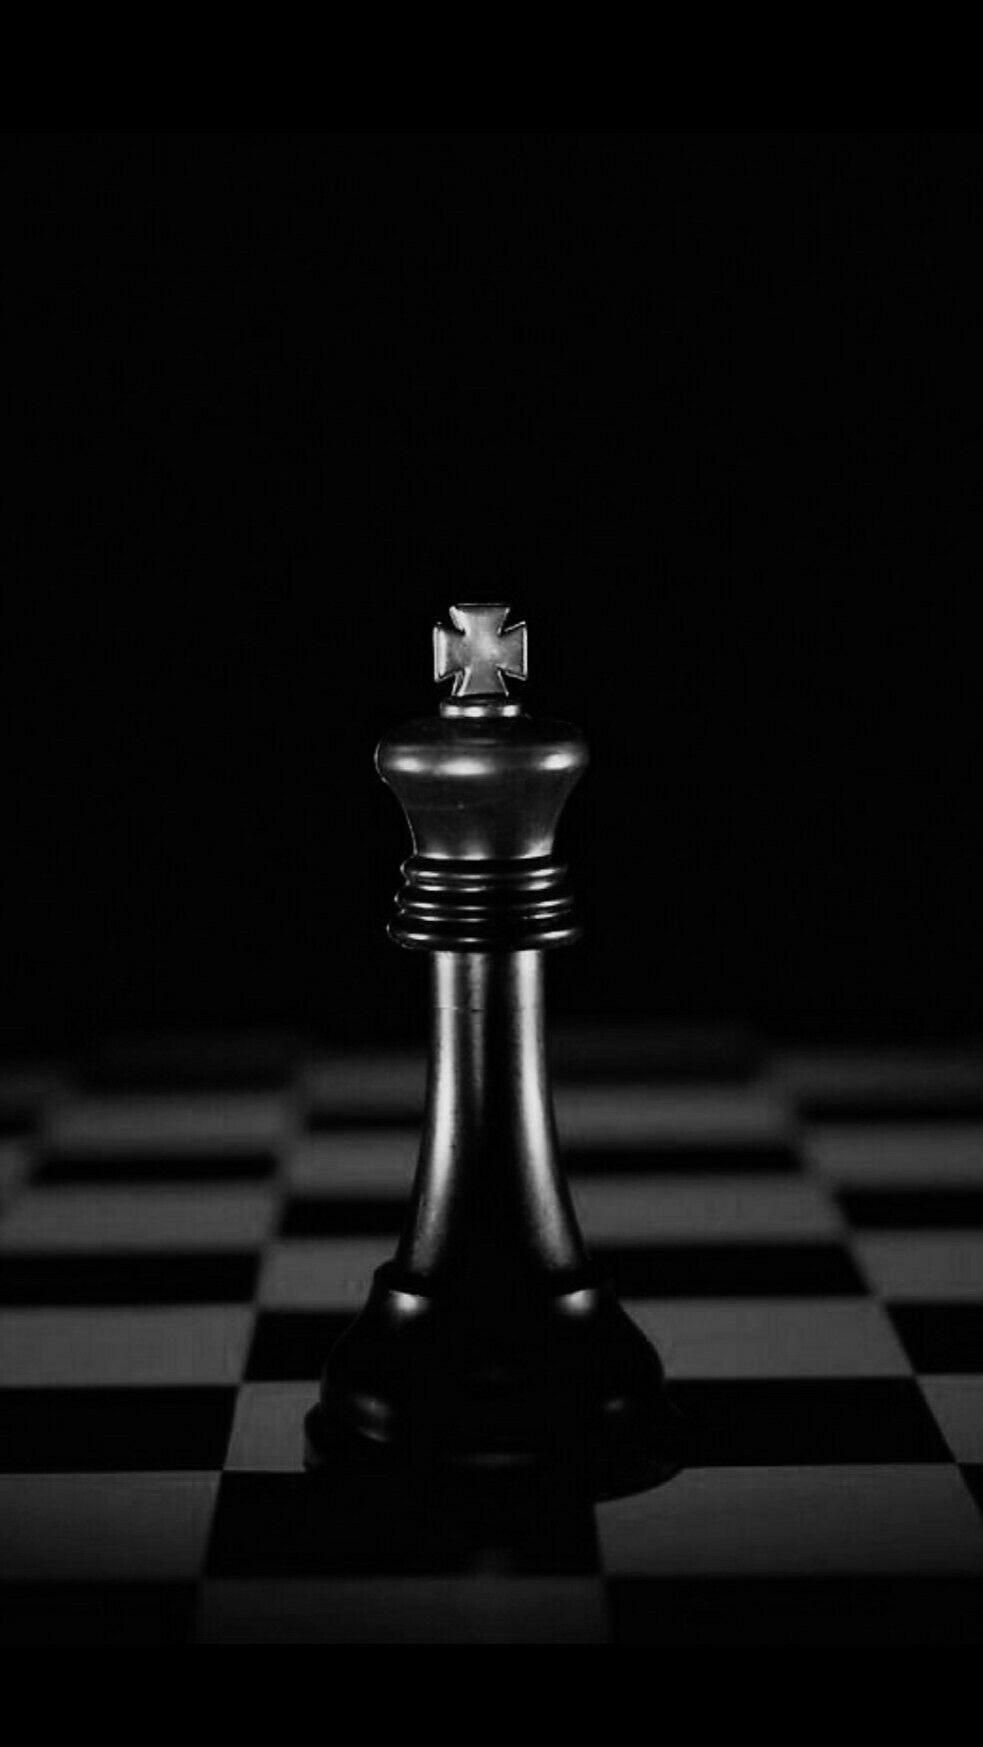 chess aesthetic wallpaper, if you want to see more please follow us. Chess king, Black wallpaper, Black and white picture wall